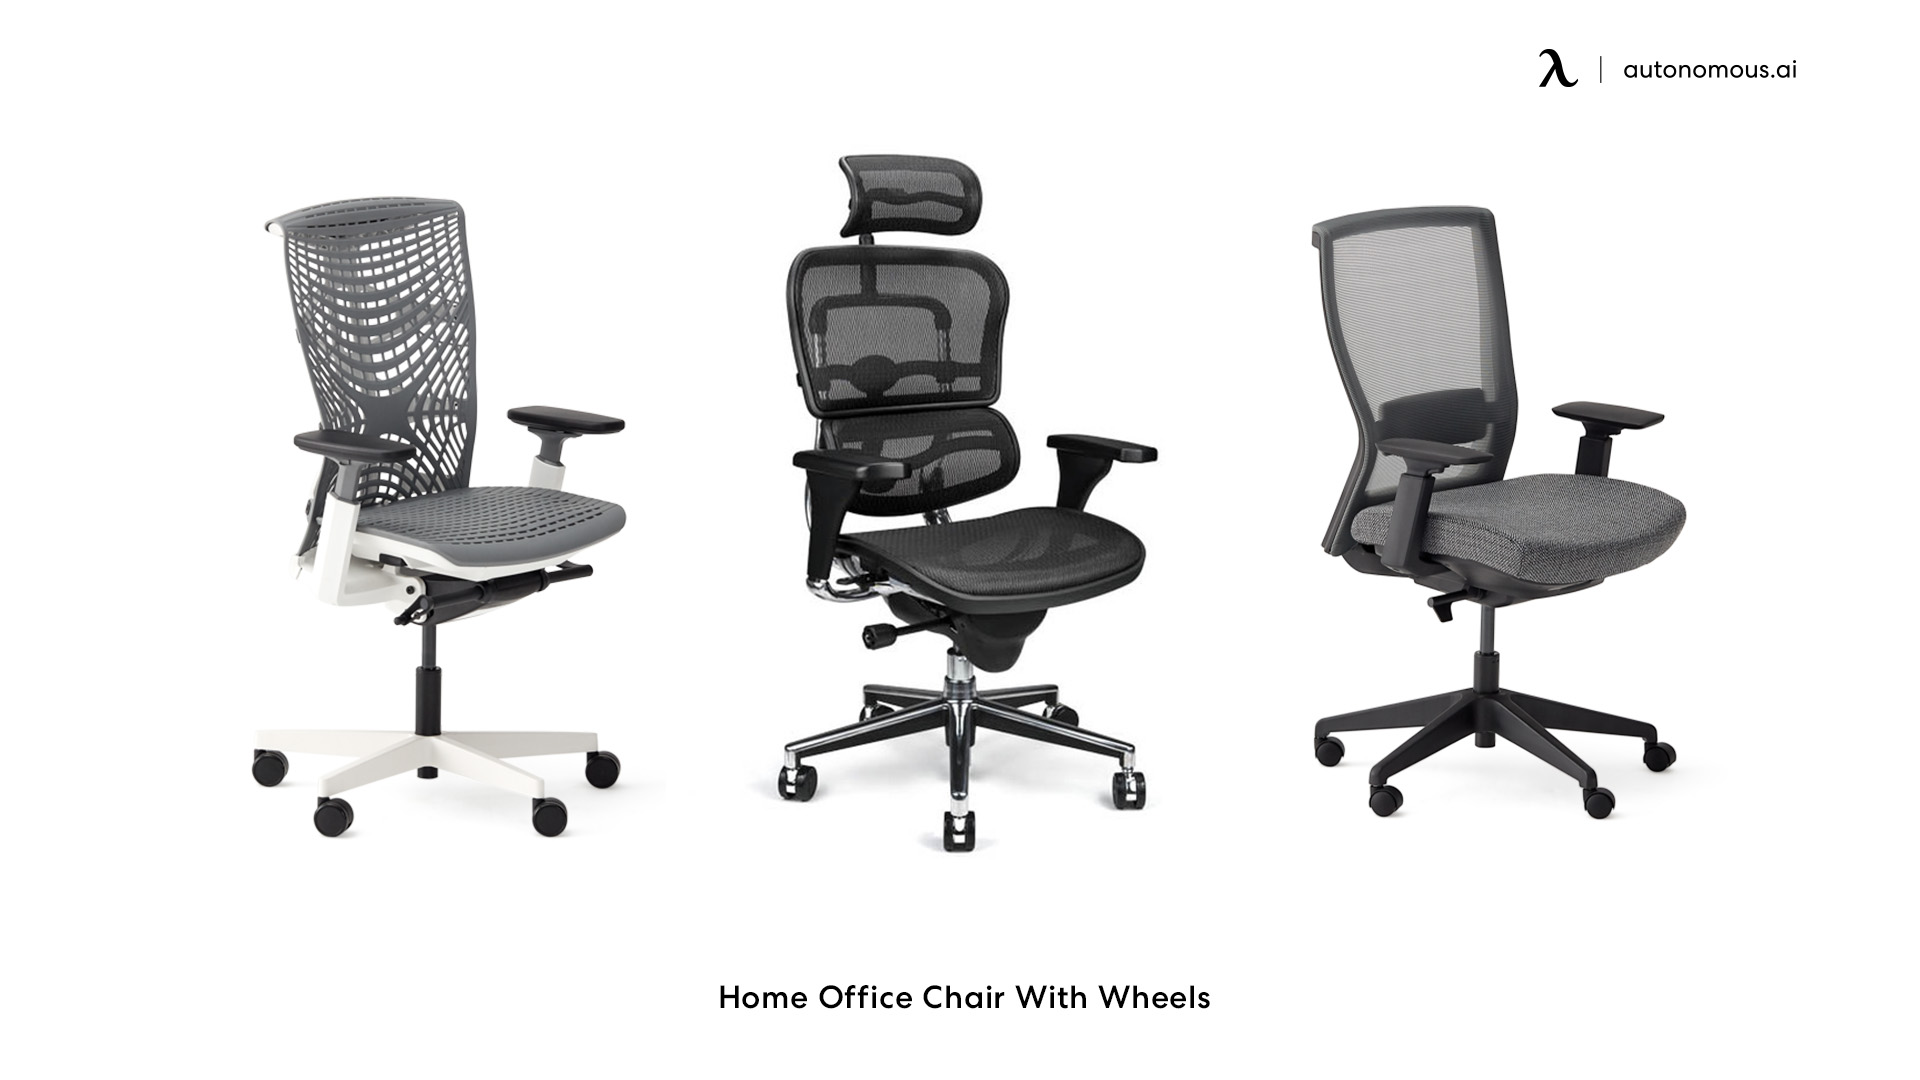 Pros & Cons of Home Office Chair Without Wheels